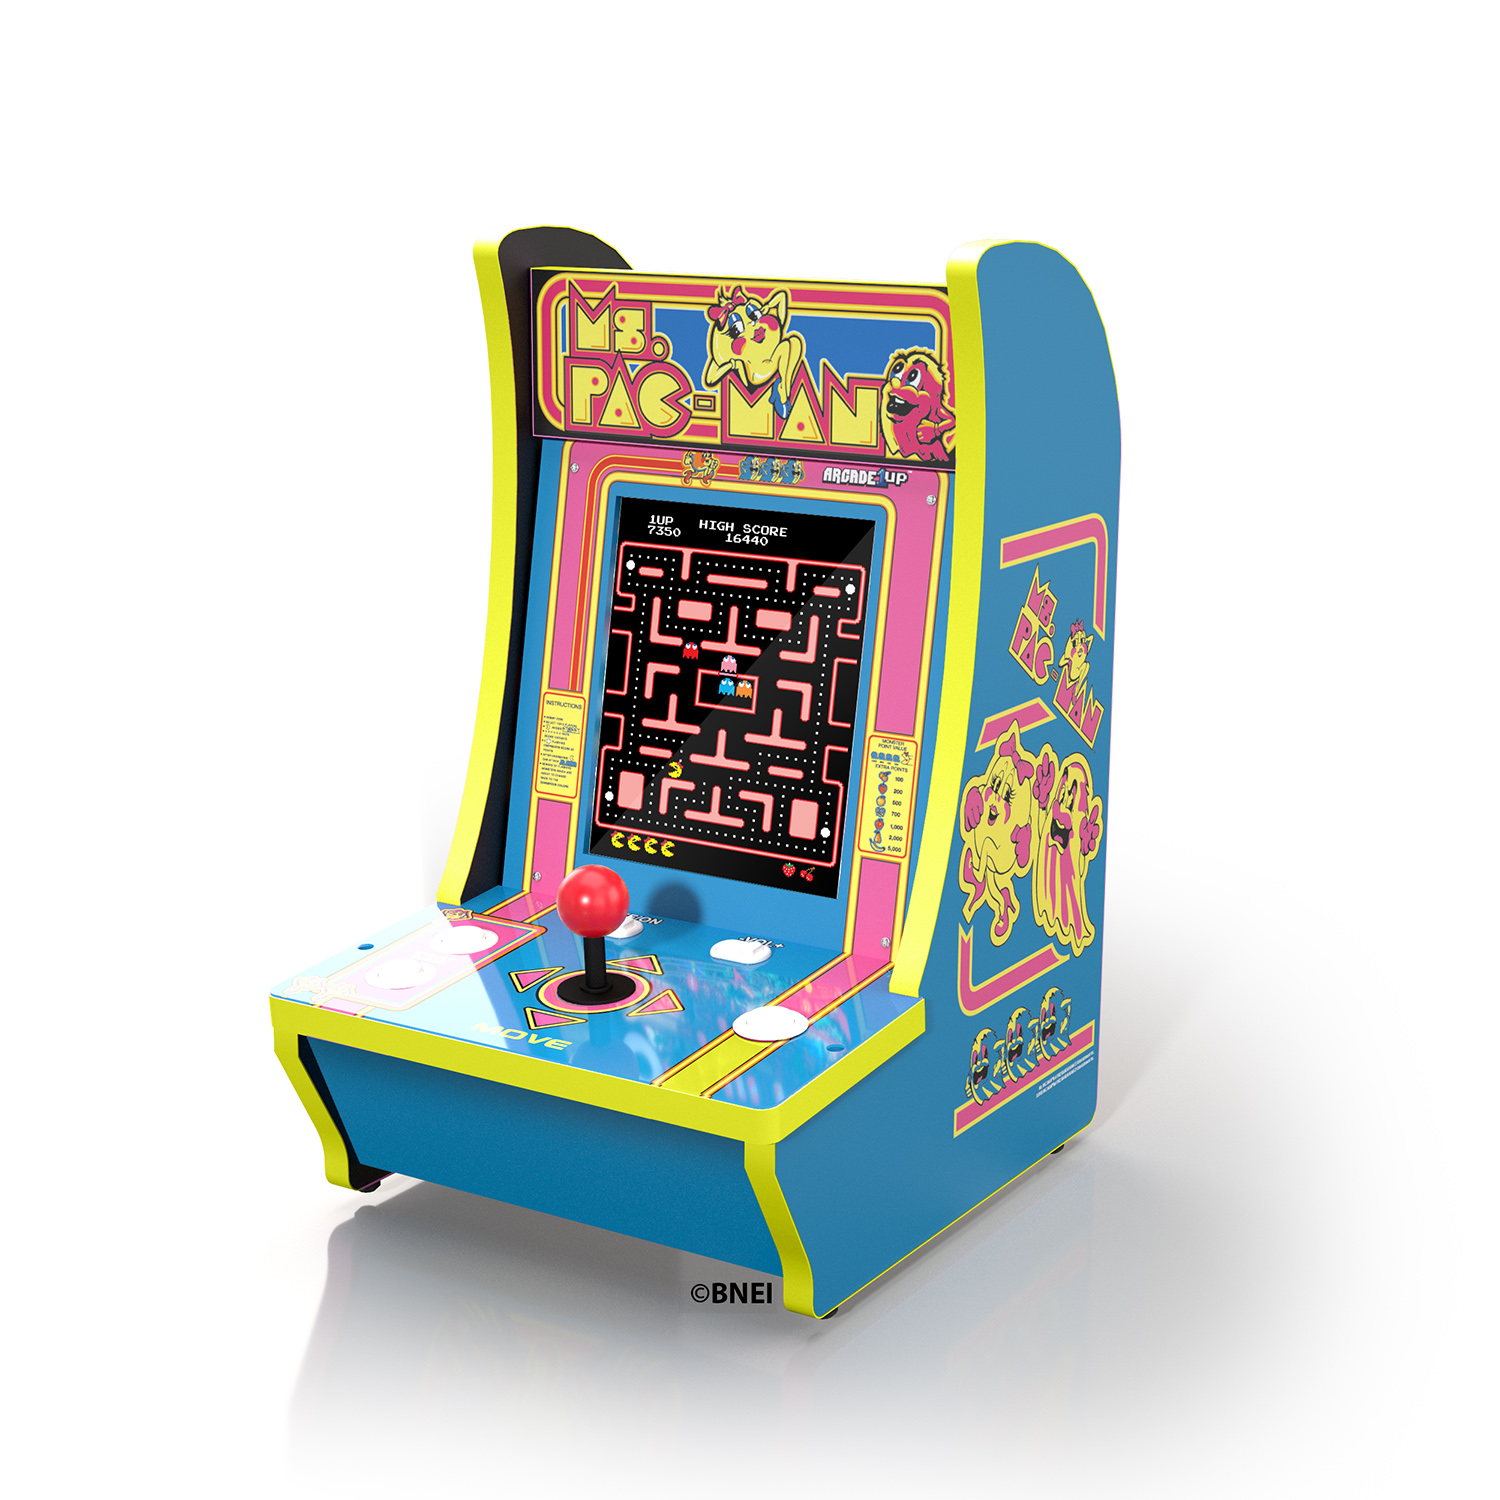 Ms. PAC-MAN Counter-cade, 4 Games in 1, Arcade1UP - image 2 of 7